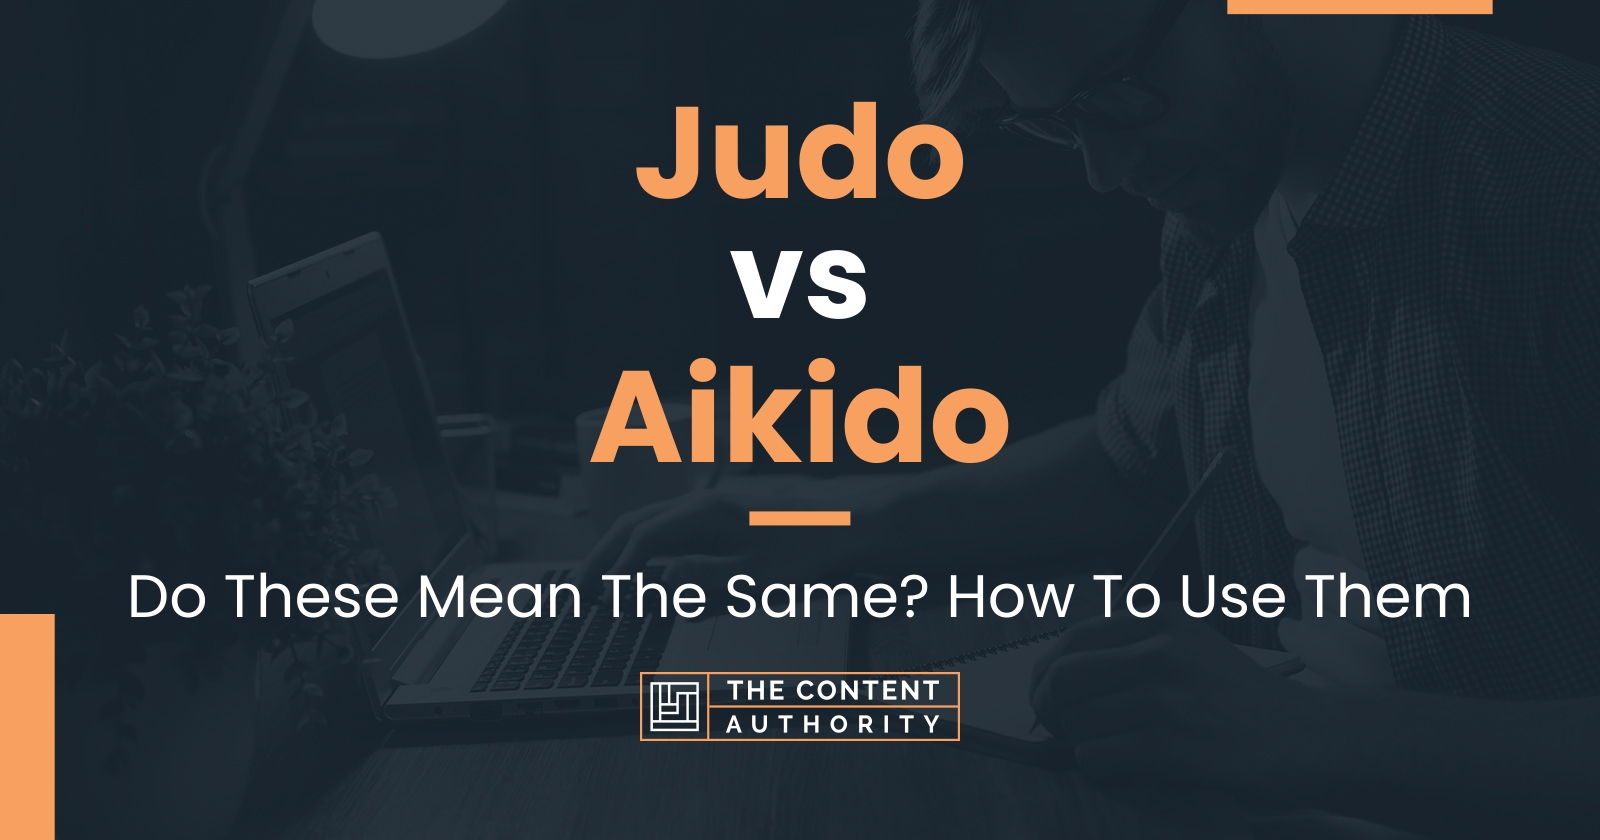 Judo vs Aikido: Do These Mean The Same? How To Use Them